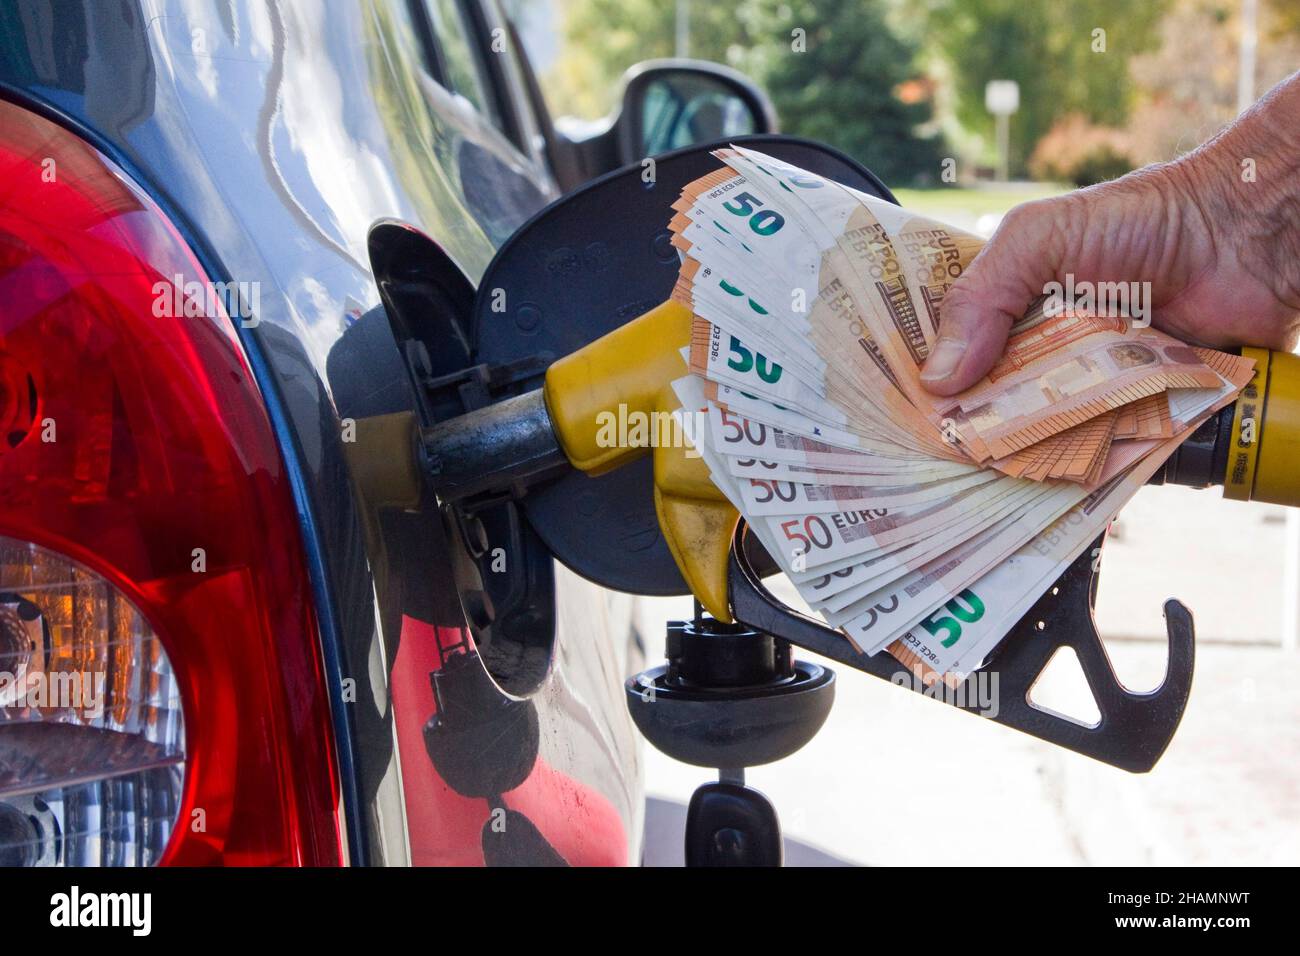 Illustration on the rise in pump prices. Someone filling a tank with petrol at a gas station. She’s holding a petrol pump and a bundle of 50 euro bank Stock Photo